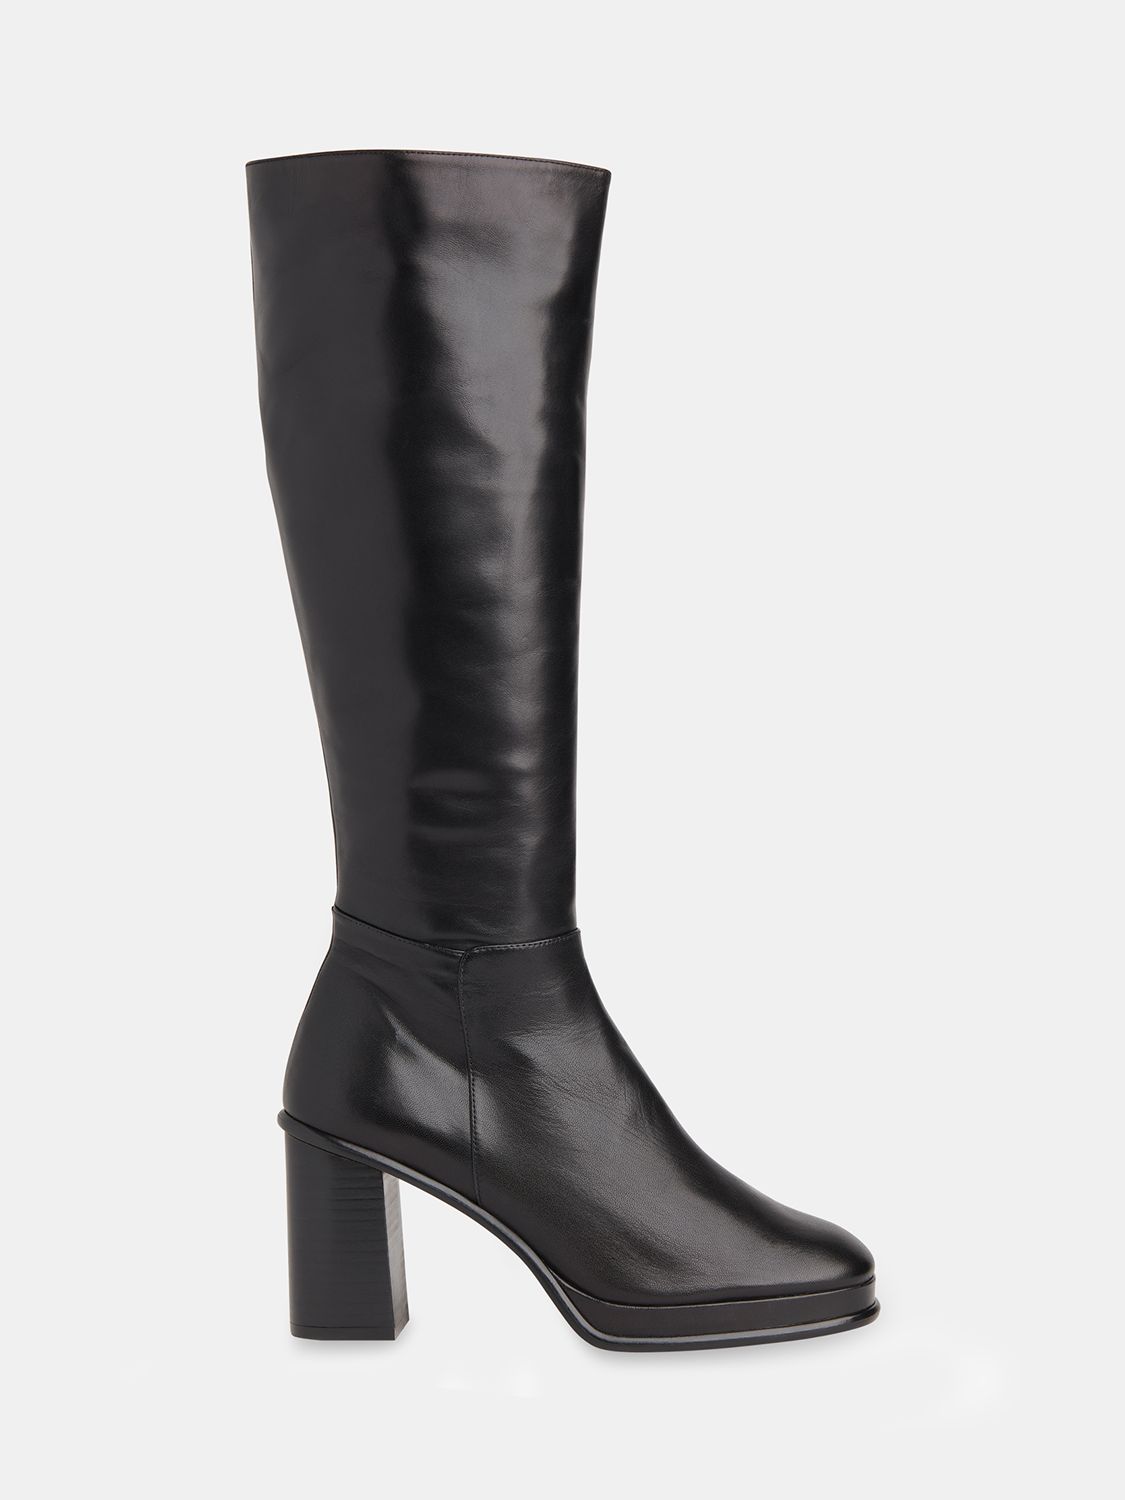 Whistles Clara Leather Knee High Boots, Black, 3